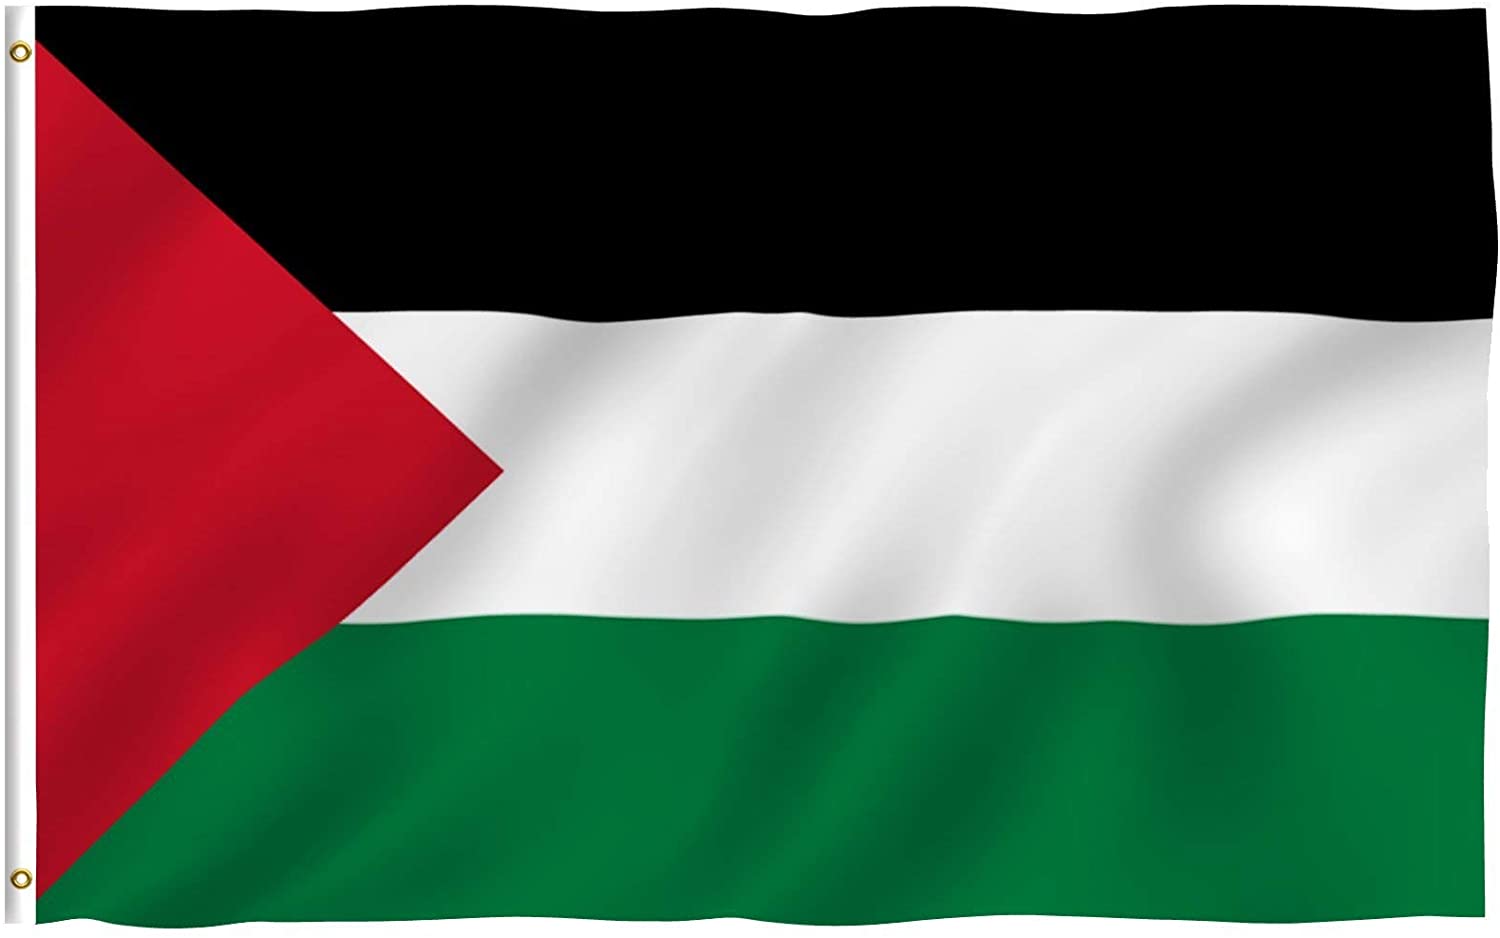 Palestine Dura Flag 5 x 3 FT Heavy Duty Durable With Clips and Hooks 